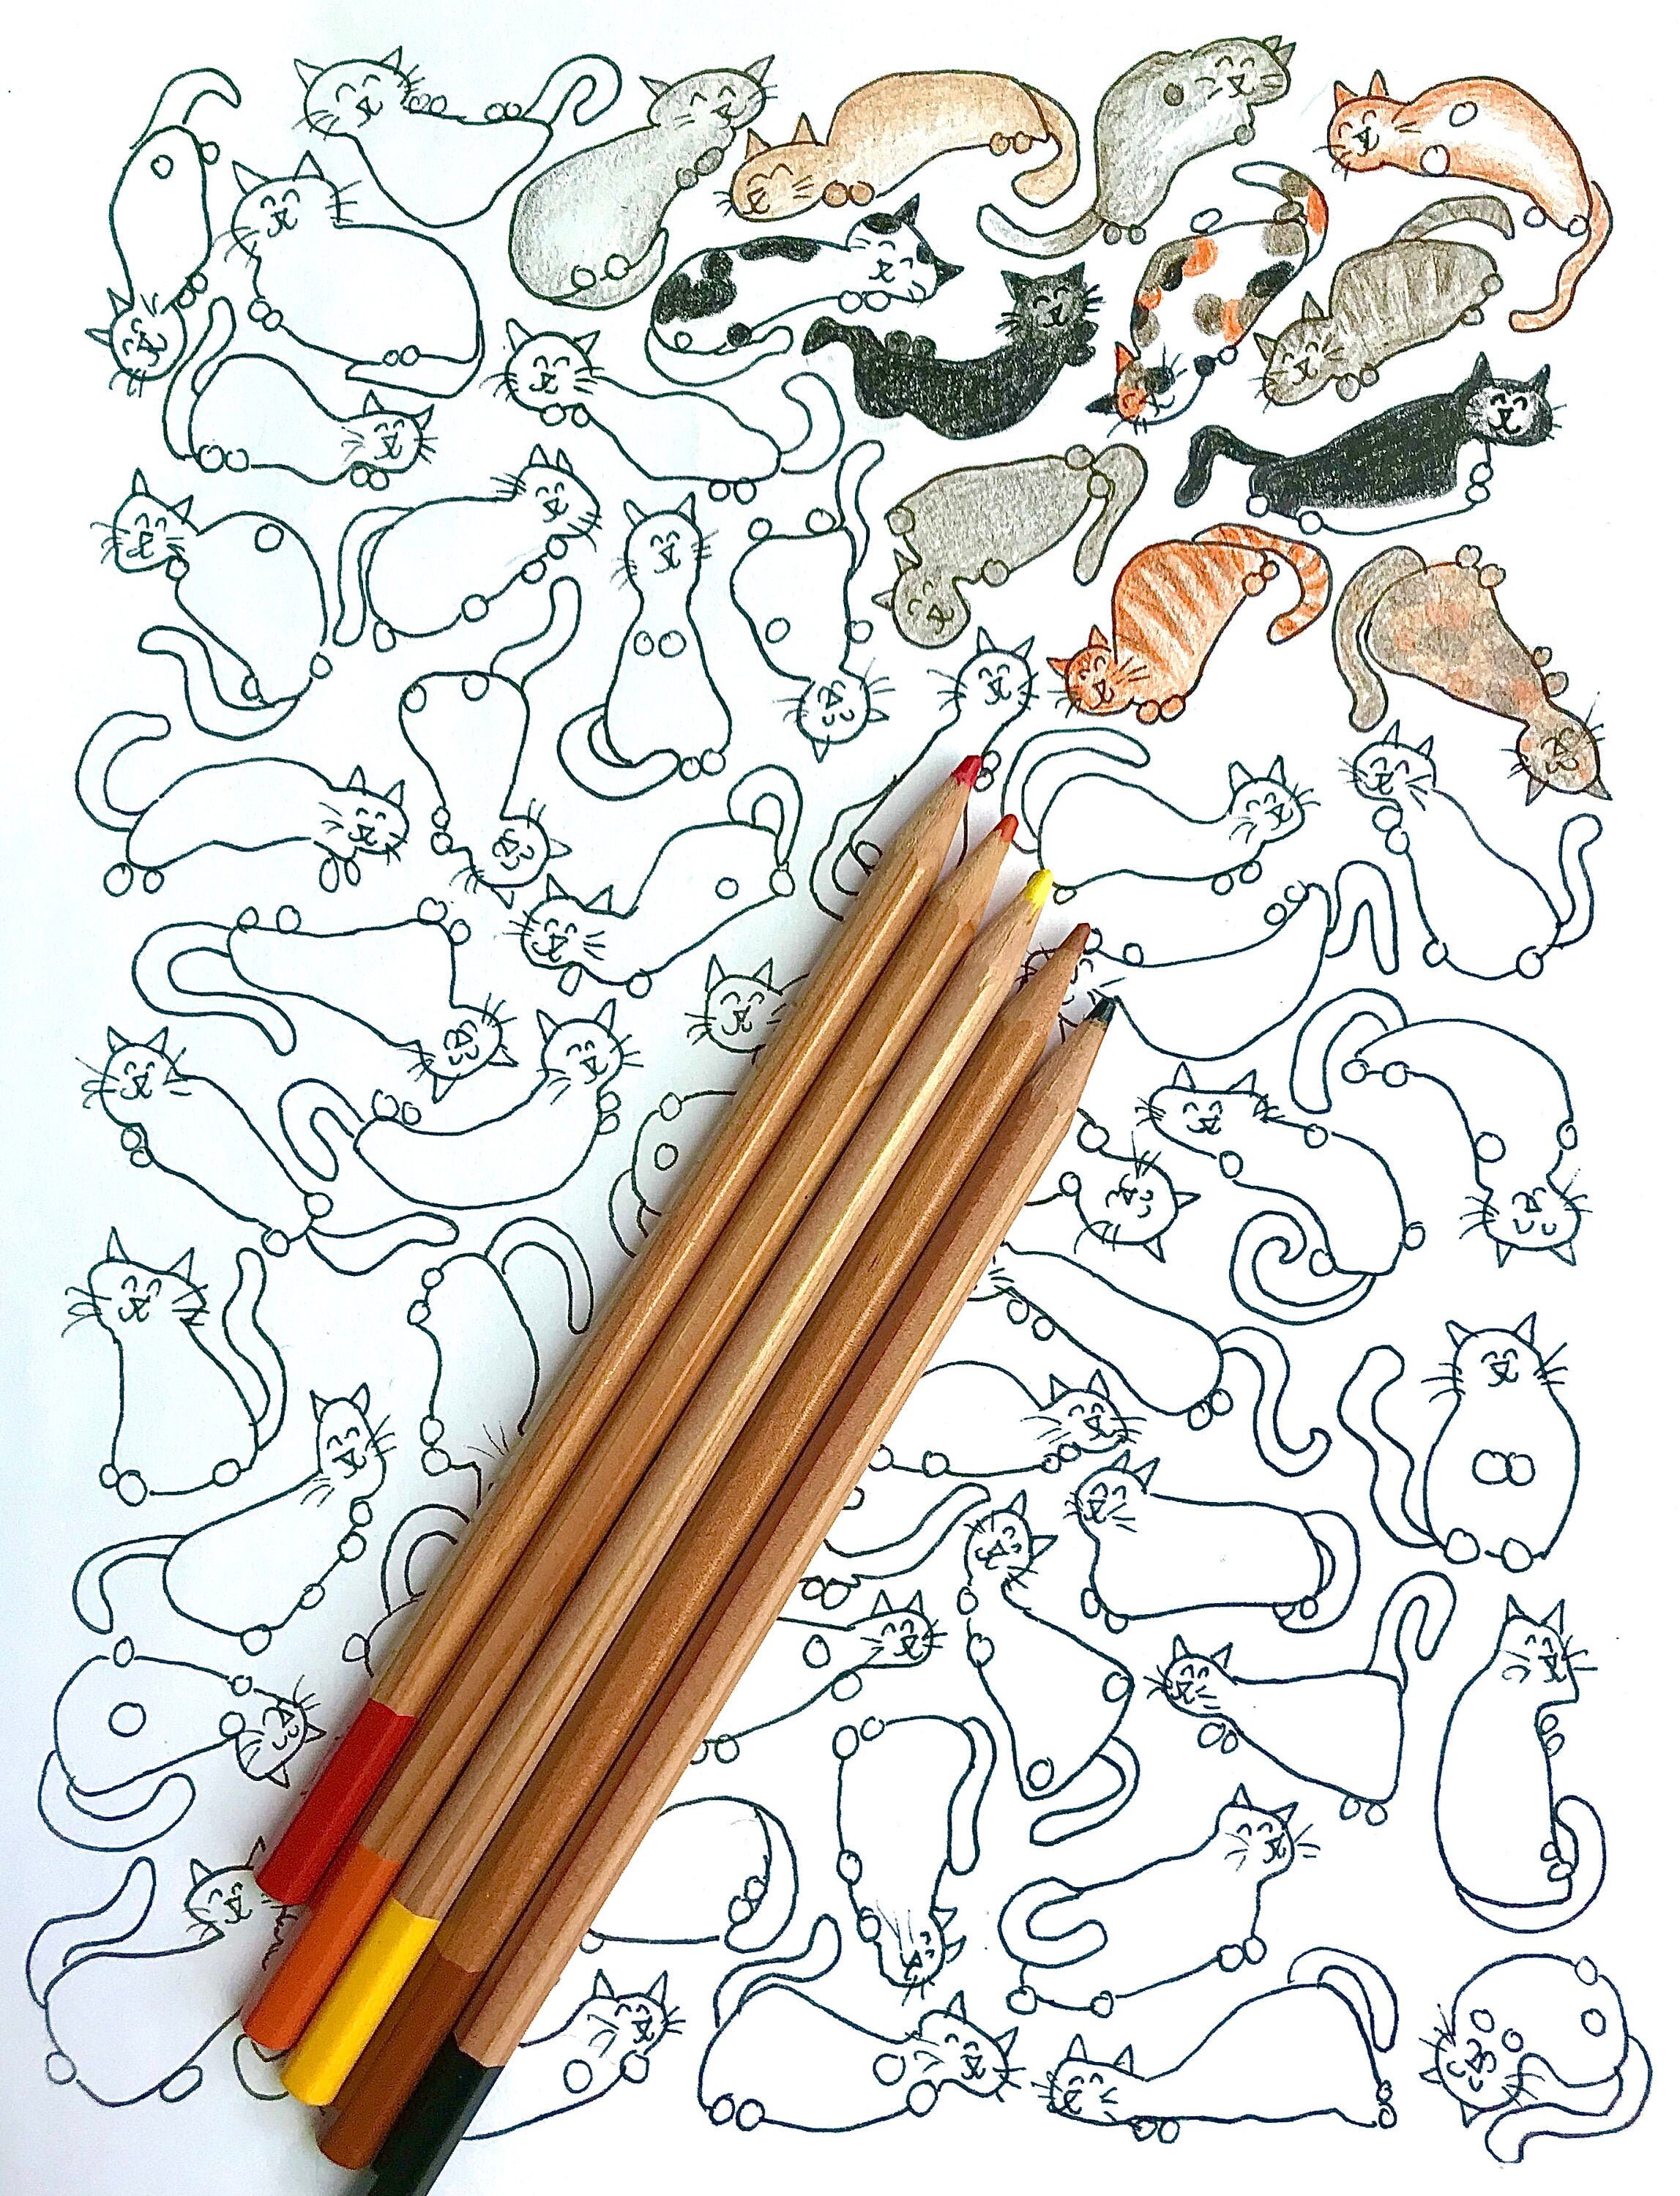 Cats coloring page color collage pen ink printable download jpg